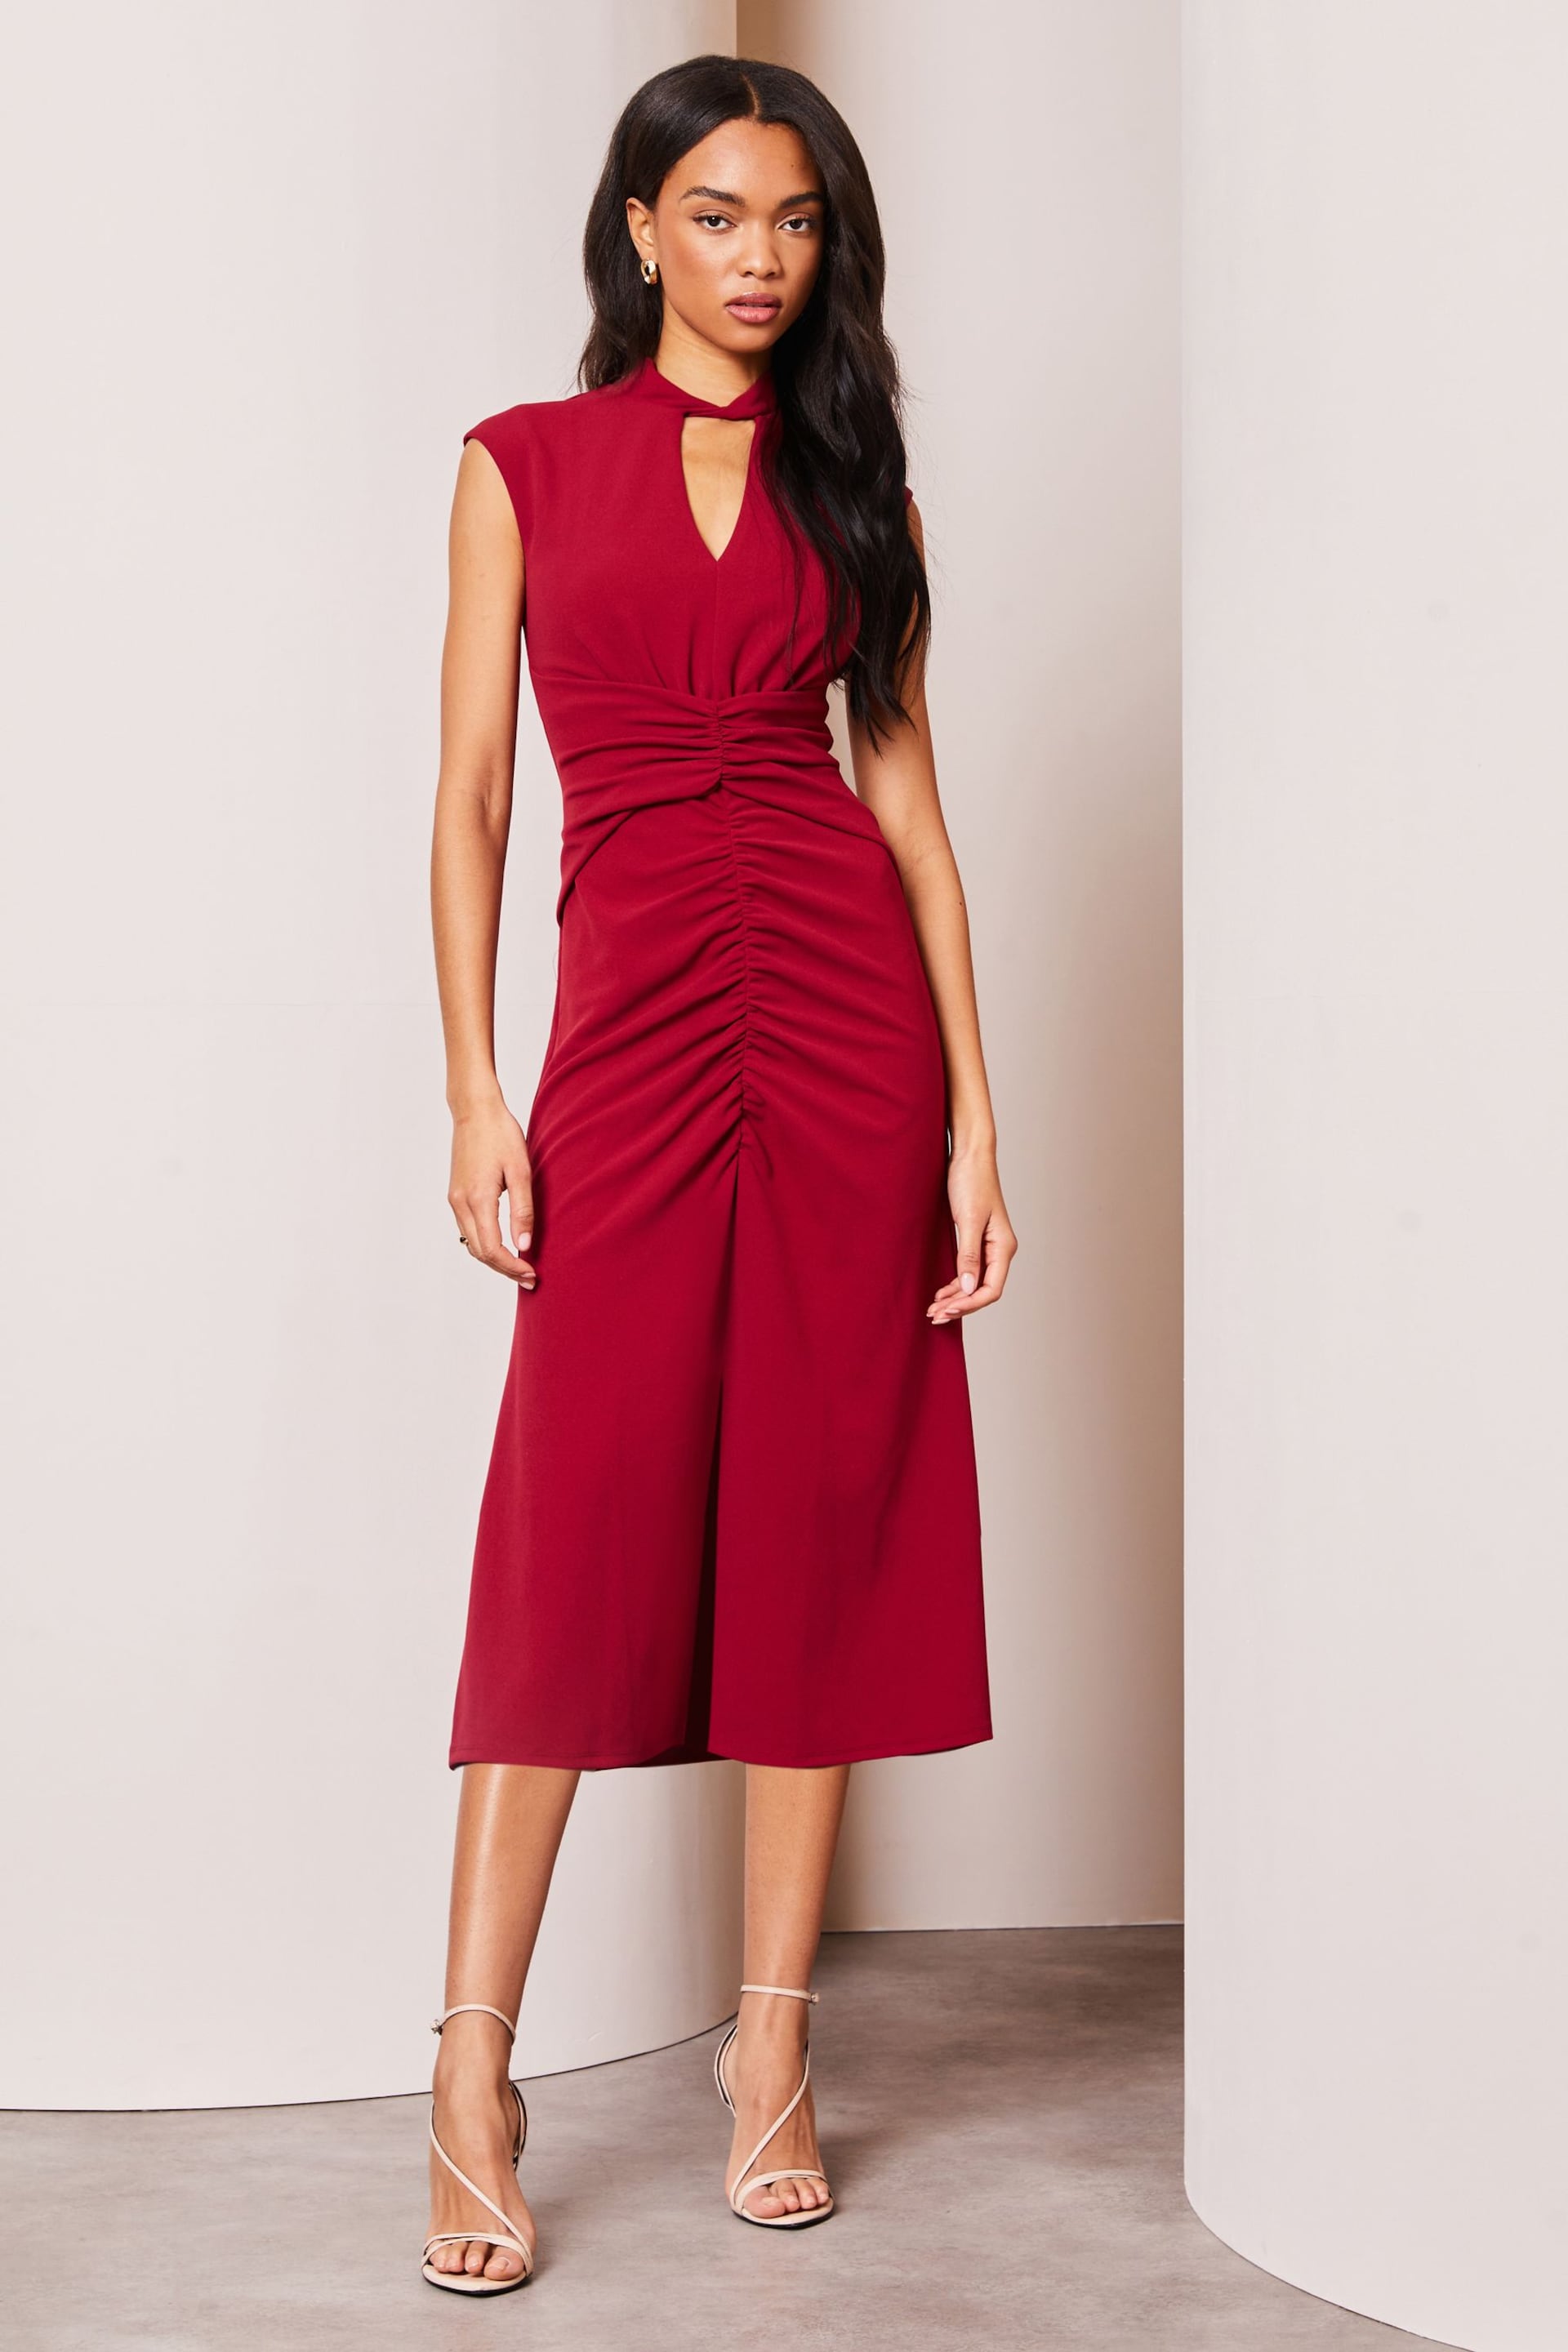 Lipsy Berry Red Ruched Front Keyhole Short Sleeve Midi Dress - Image 1 of 4